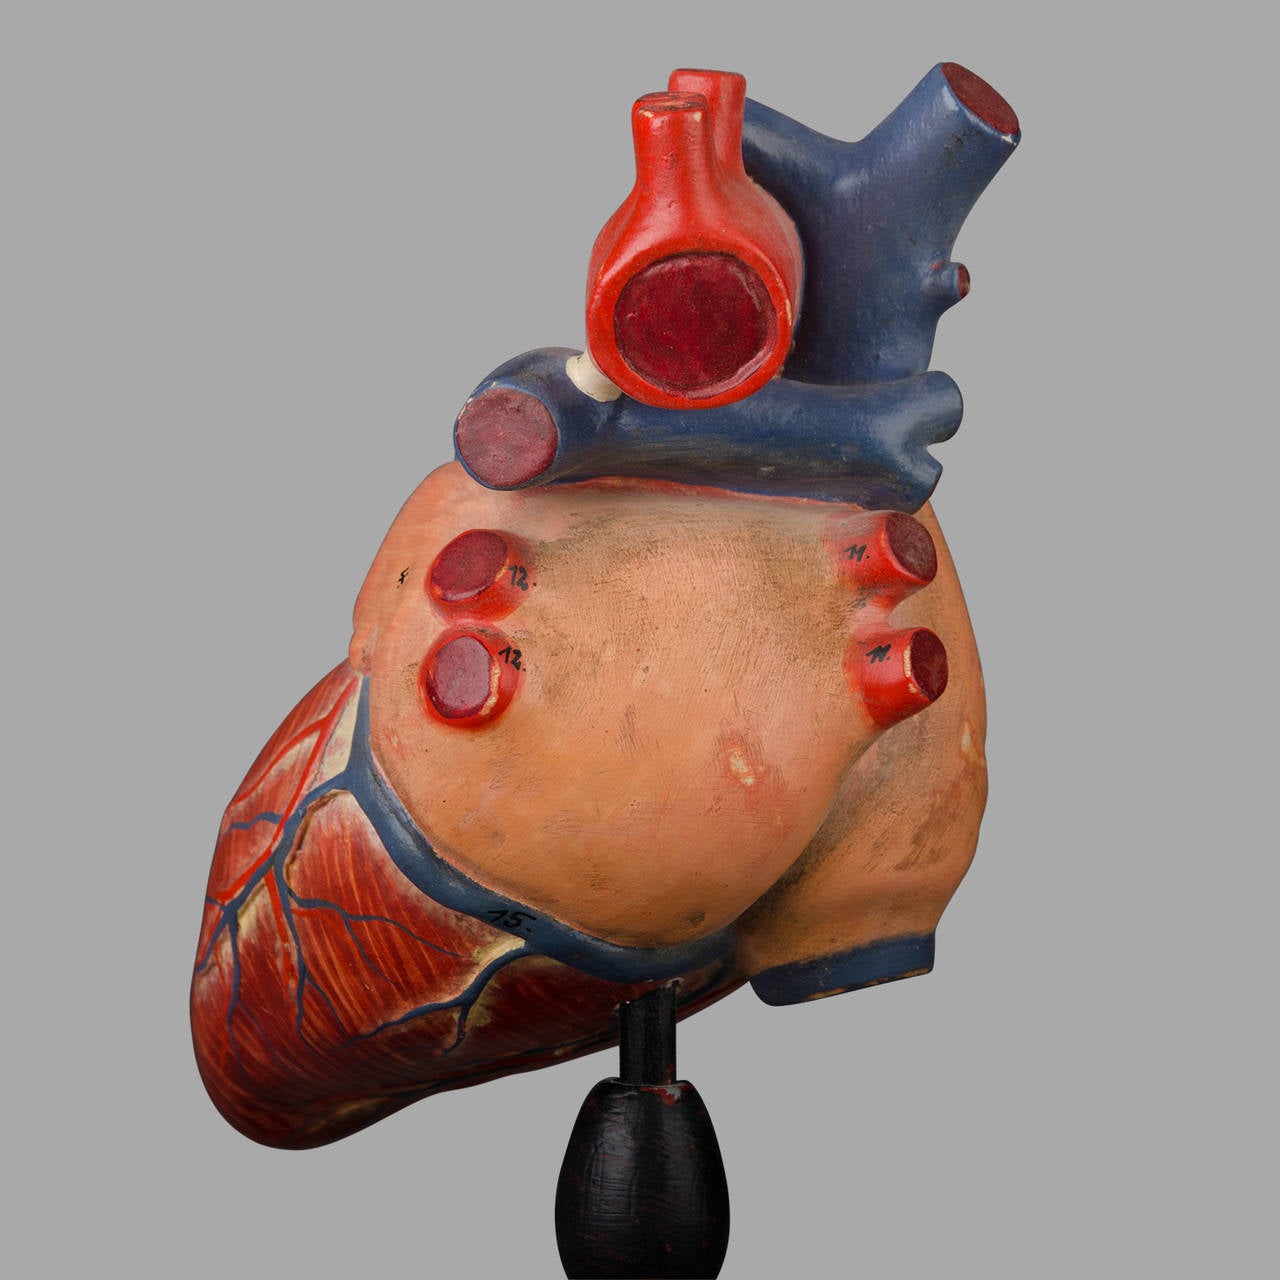 20th Century Anatomical Model of the Human Heart